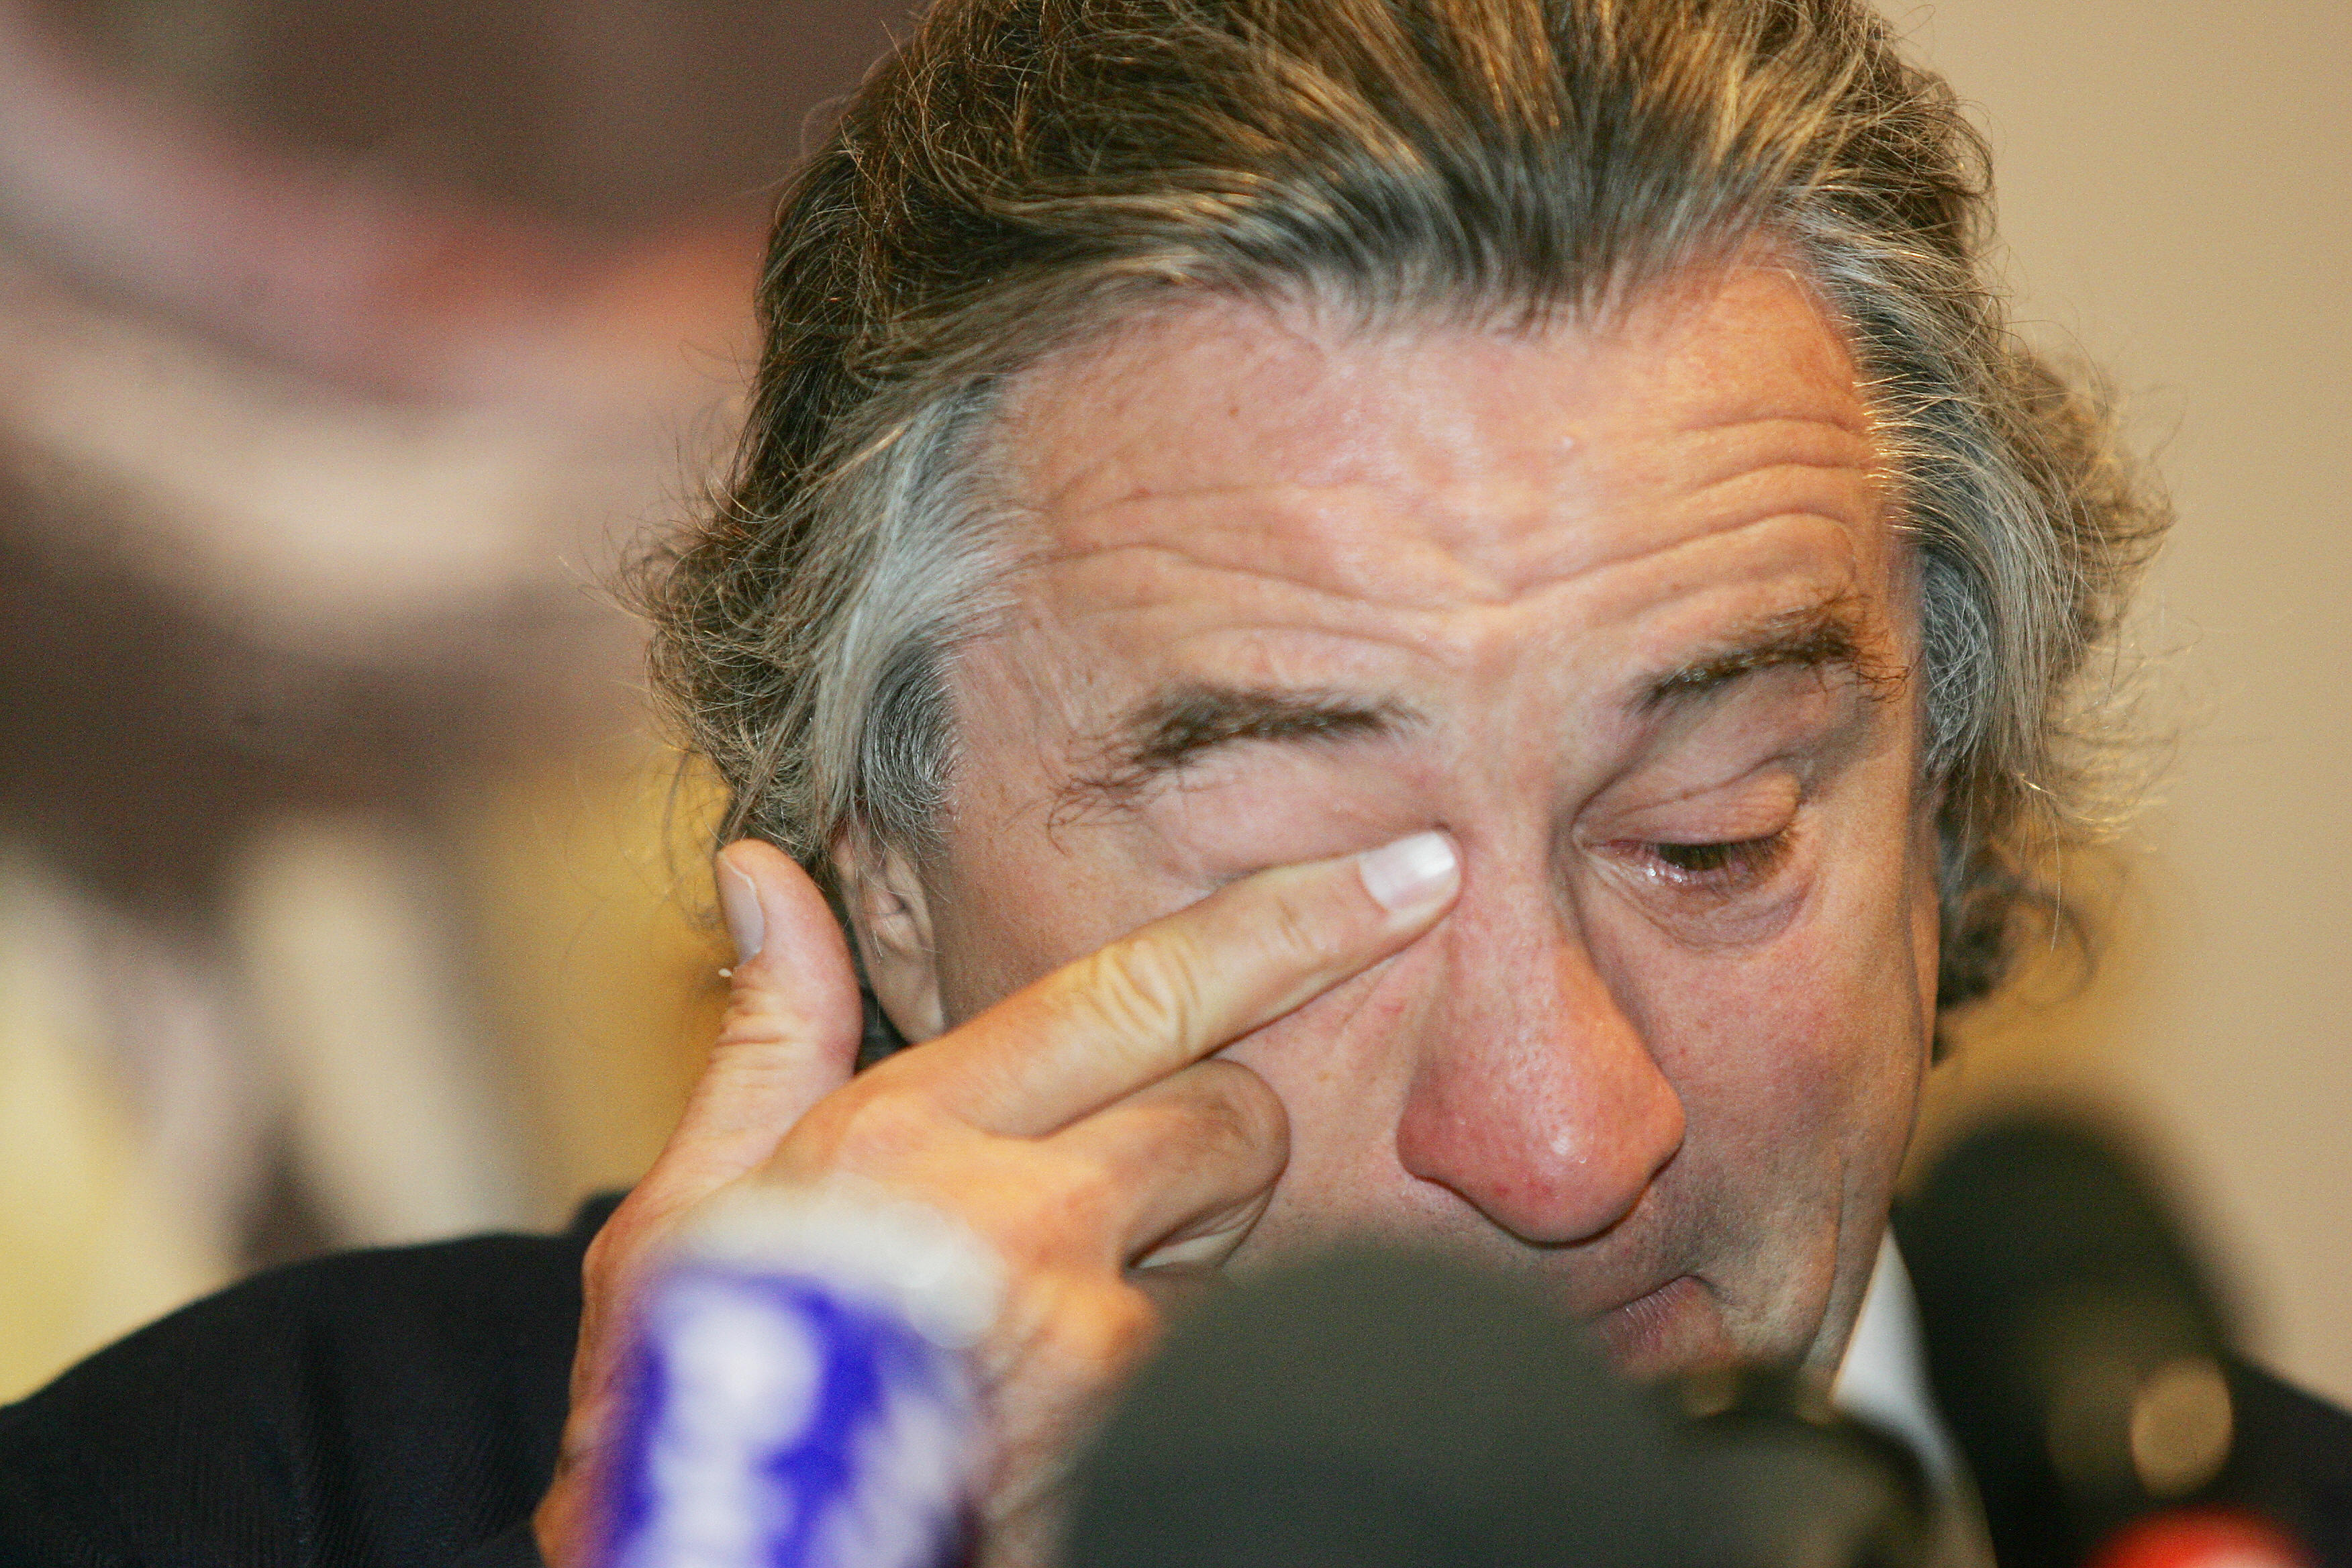 Robert De Niro emotional at a press conference on his late father, Robert De Niro Senior, on 18 June 18, 2005 in La piscine museum in Roubaix, North of France. | Source: Getty Images